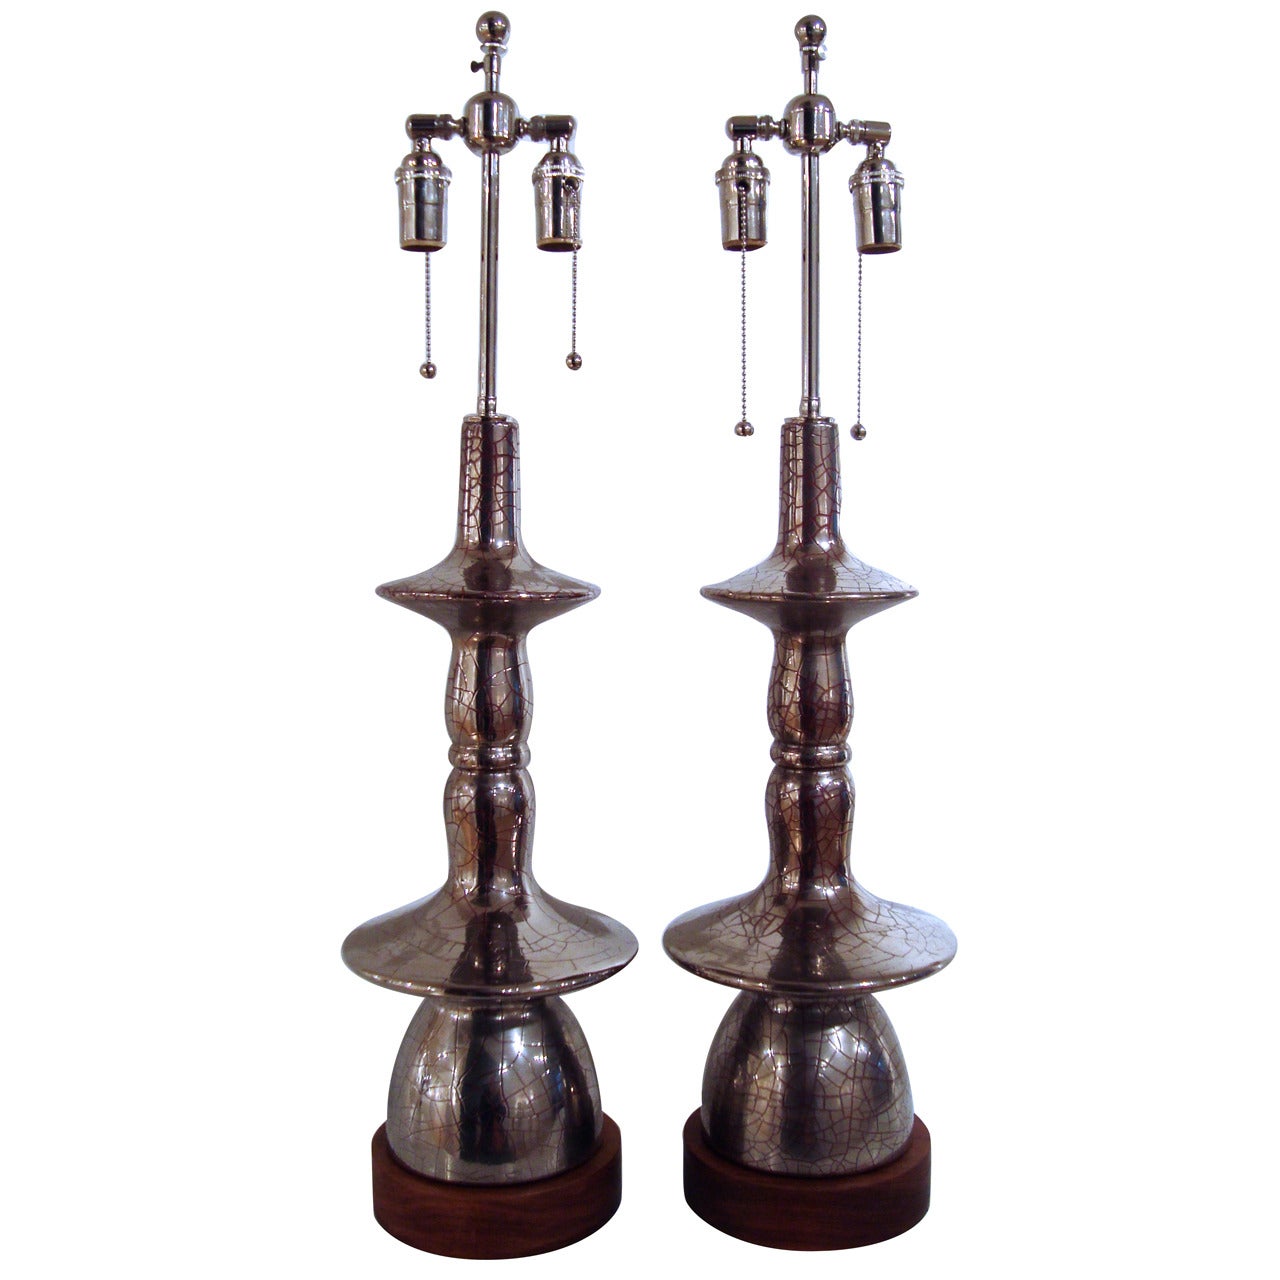 Tall Pair of 1950s Silver Craquelure Ceramic Table Lamps after James Mont